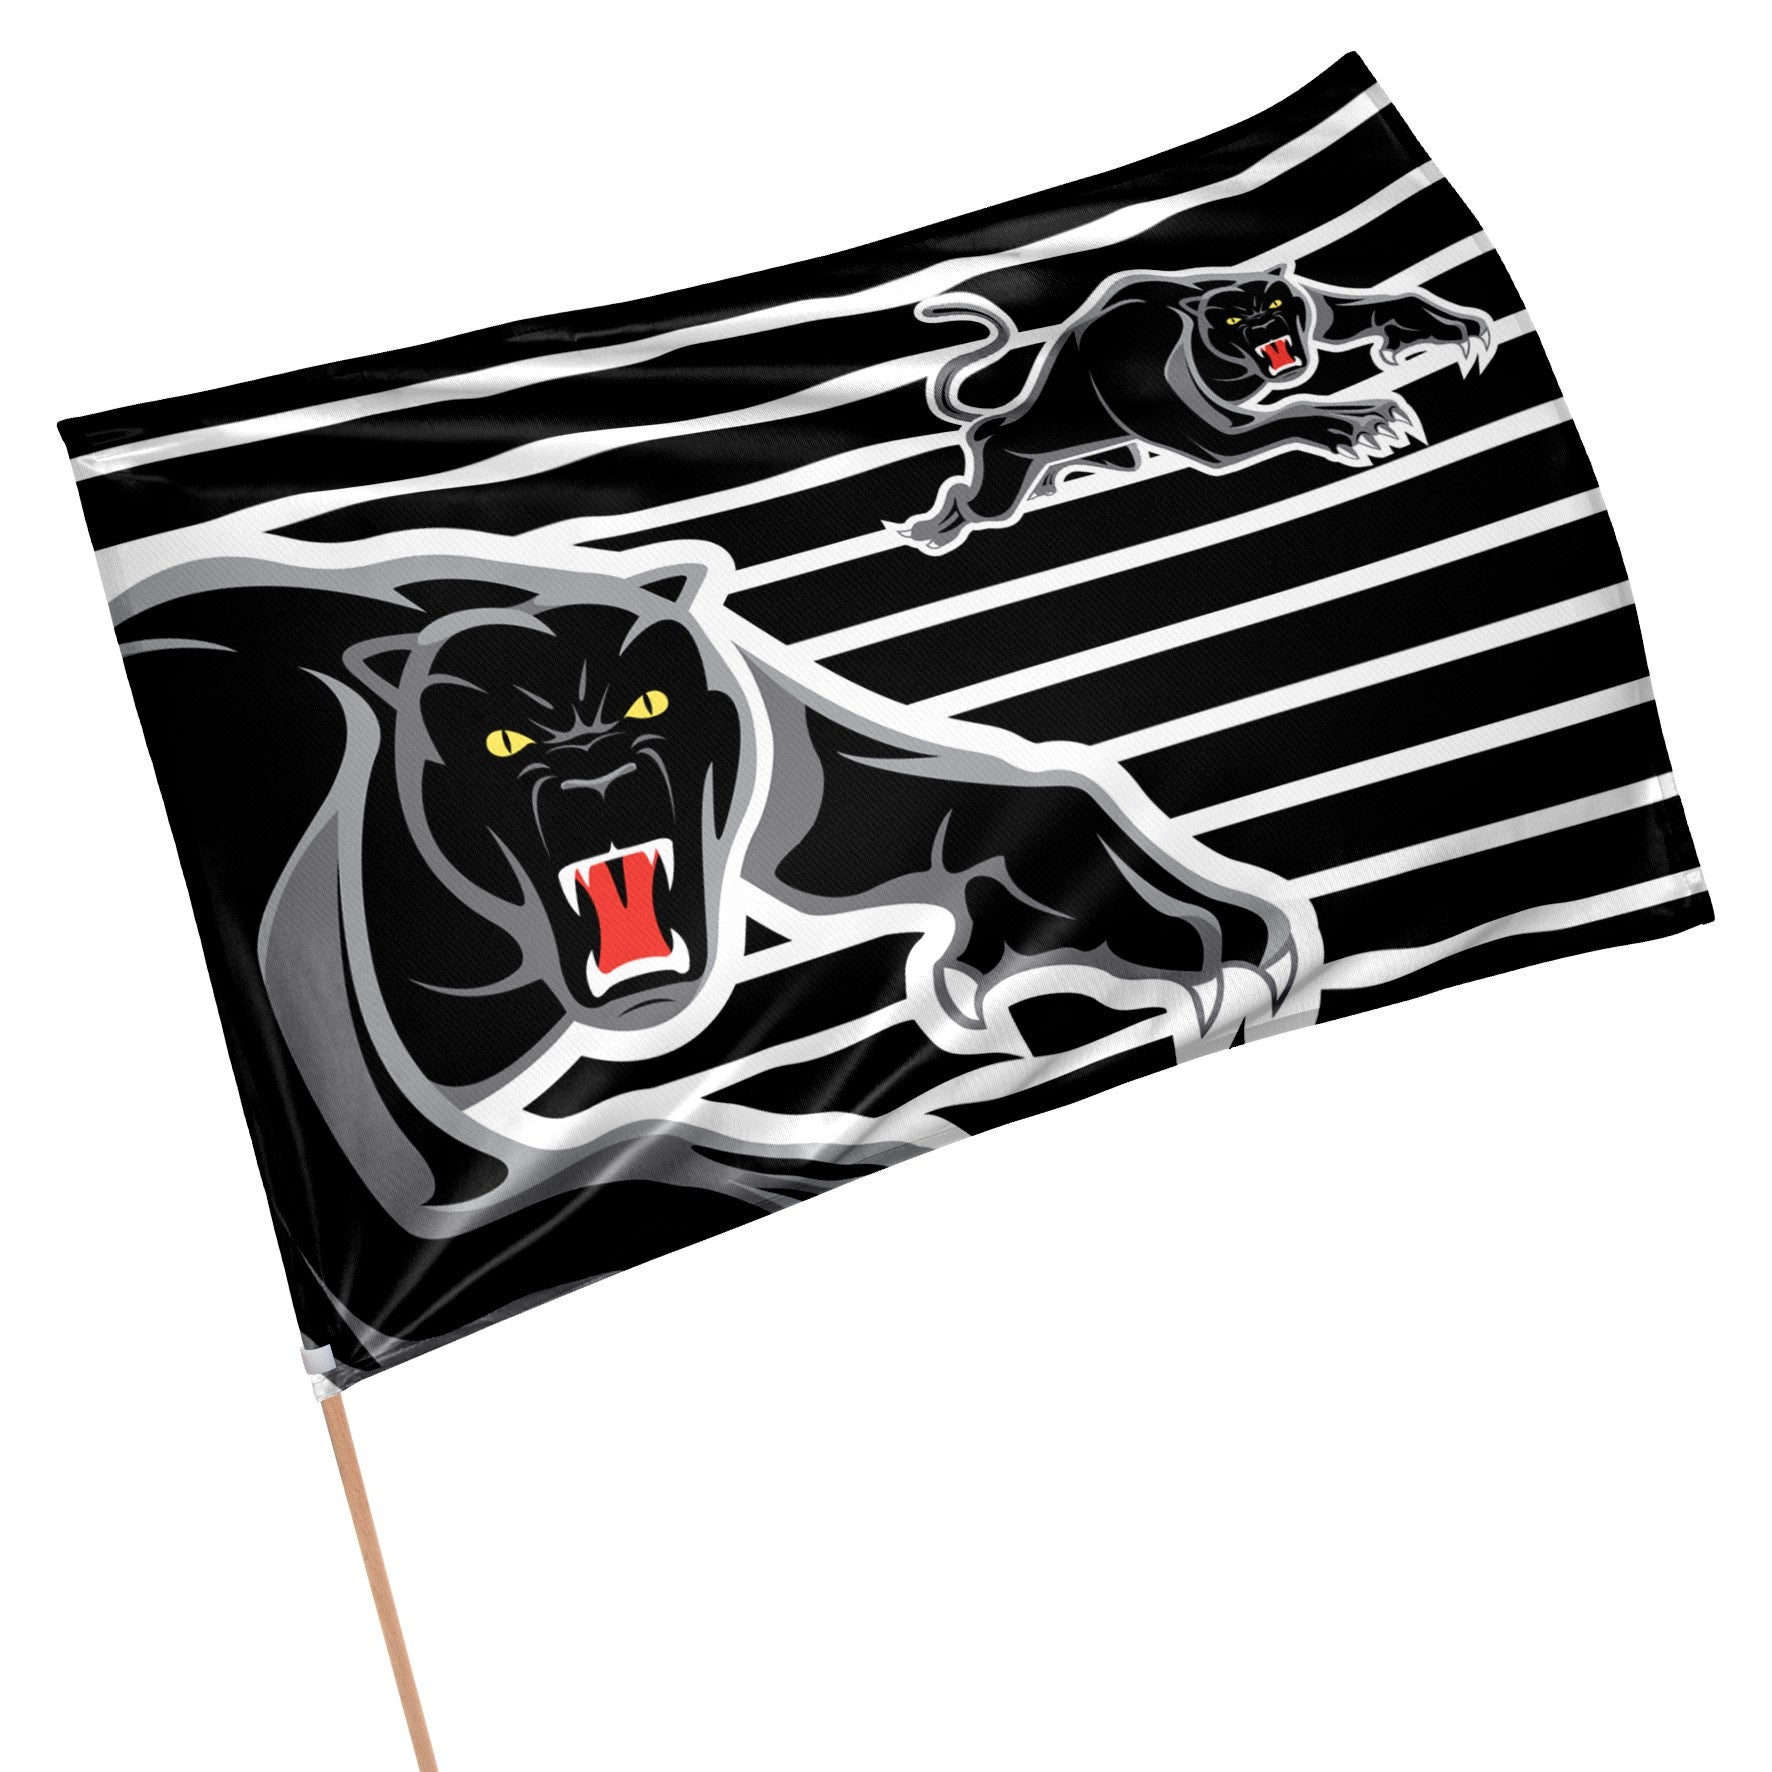 NRL Penrith Panthers - Game Day Flag - 90cm x 60cm